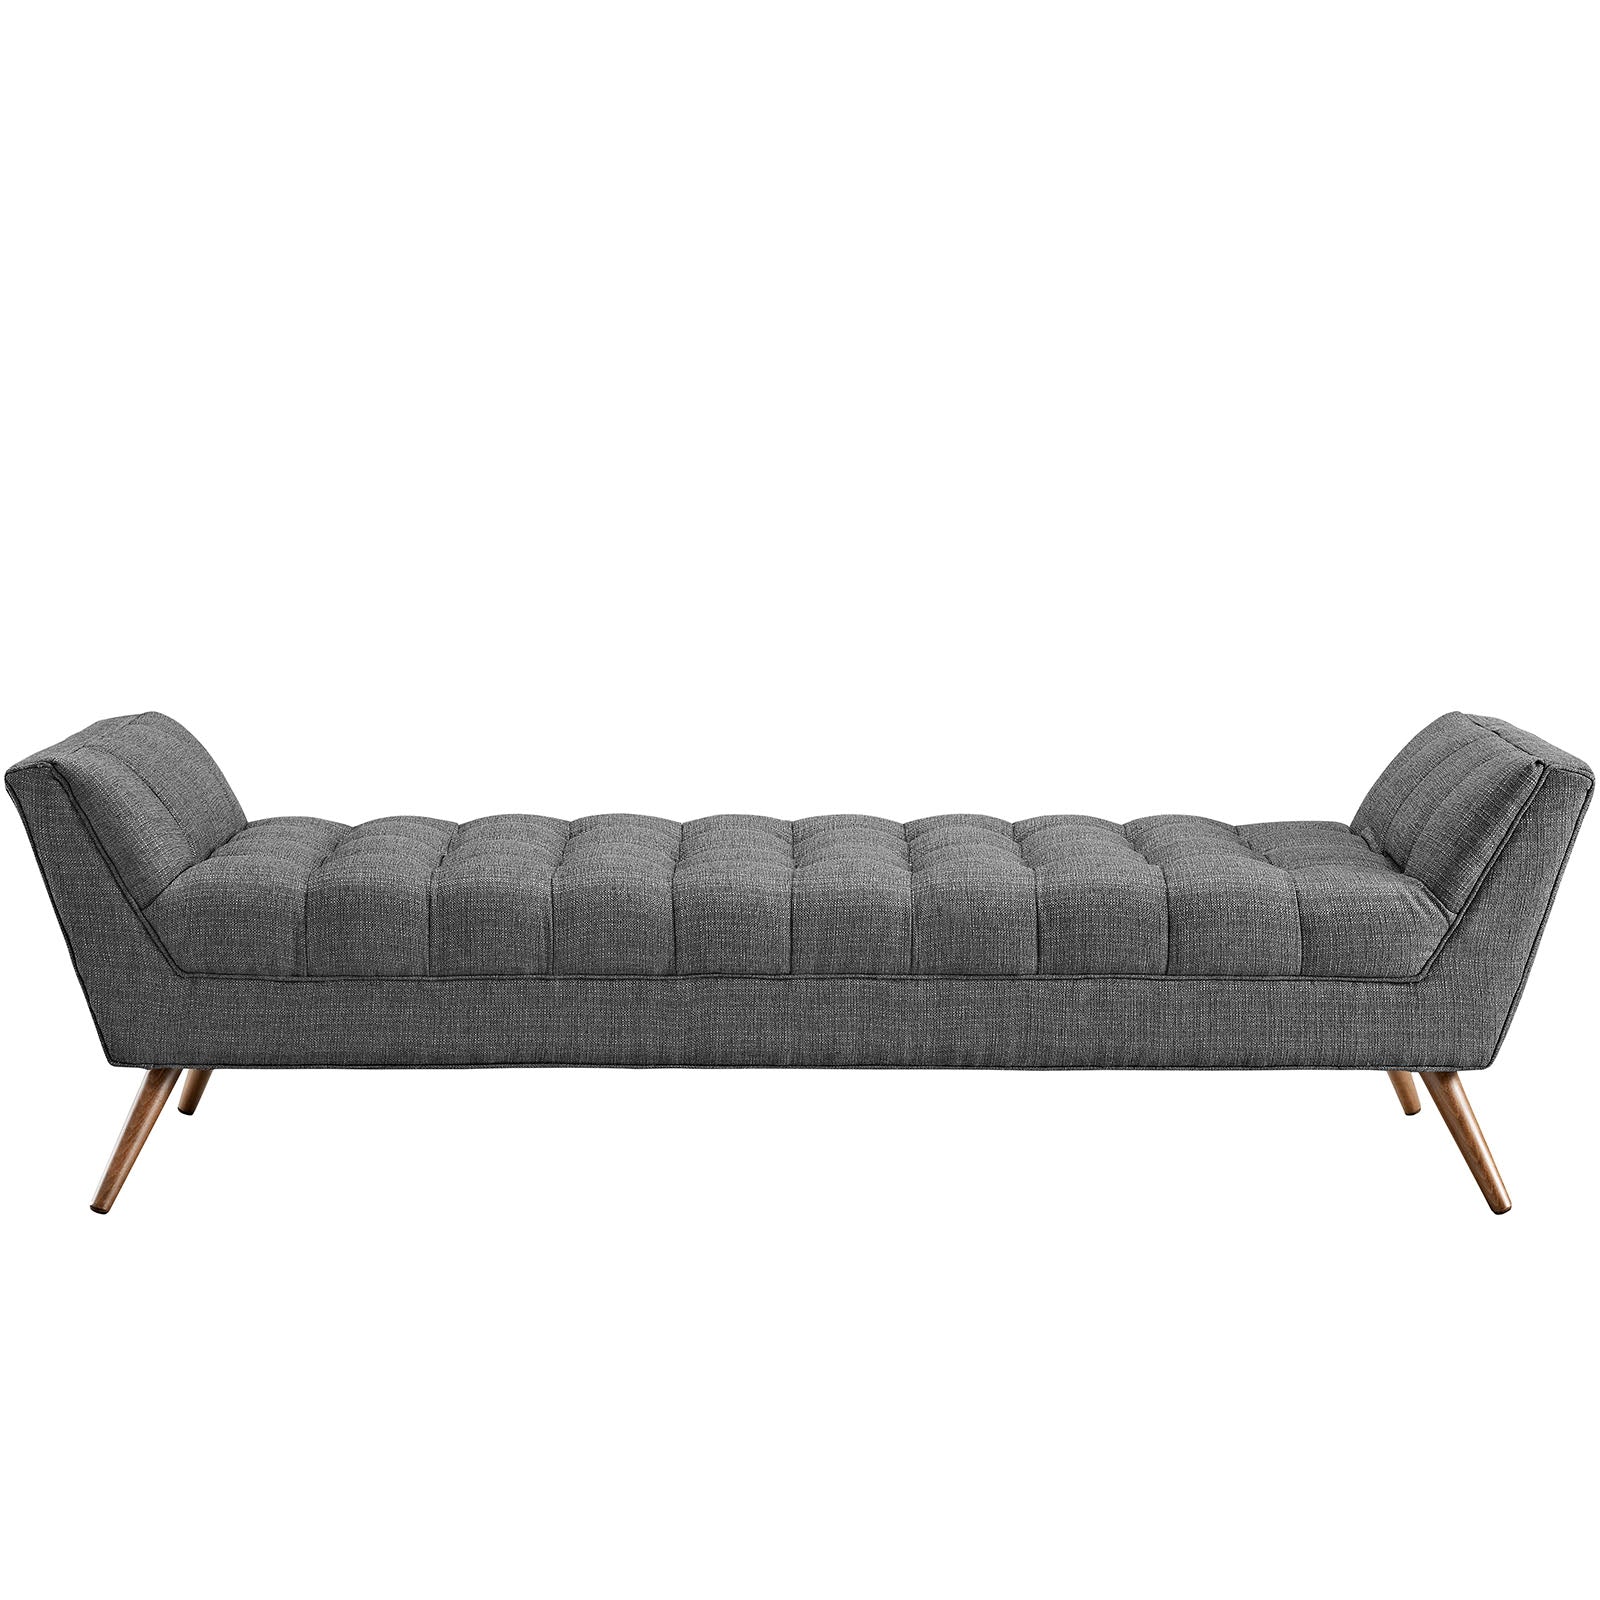 Modway Benches - Response Bench Gray